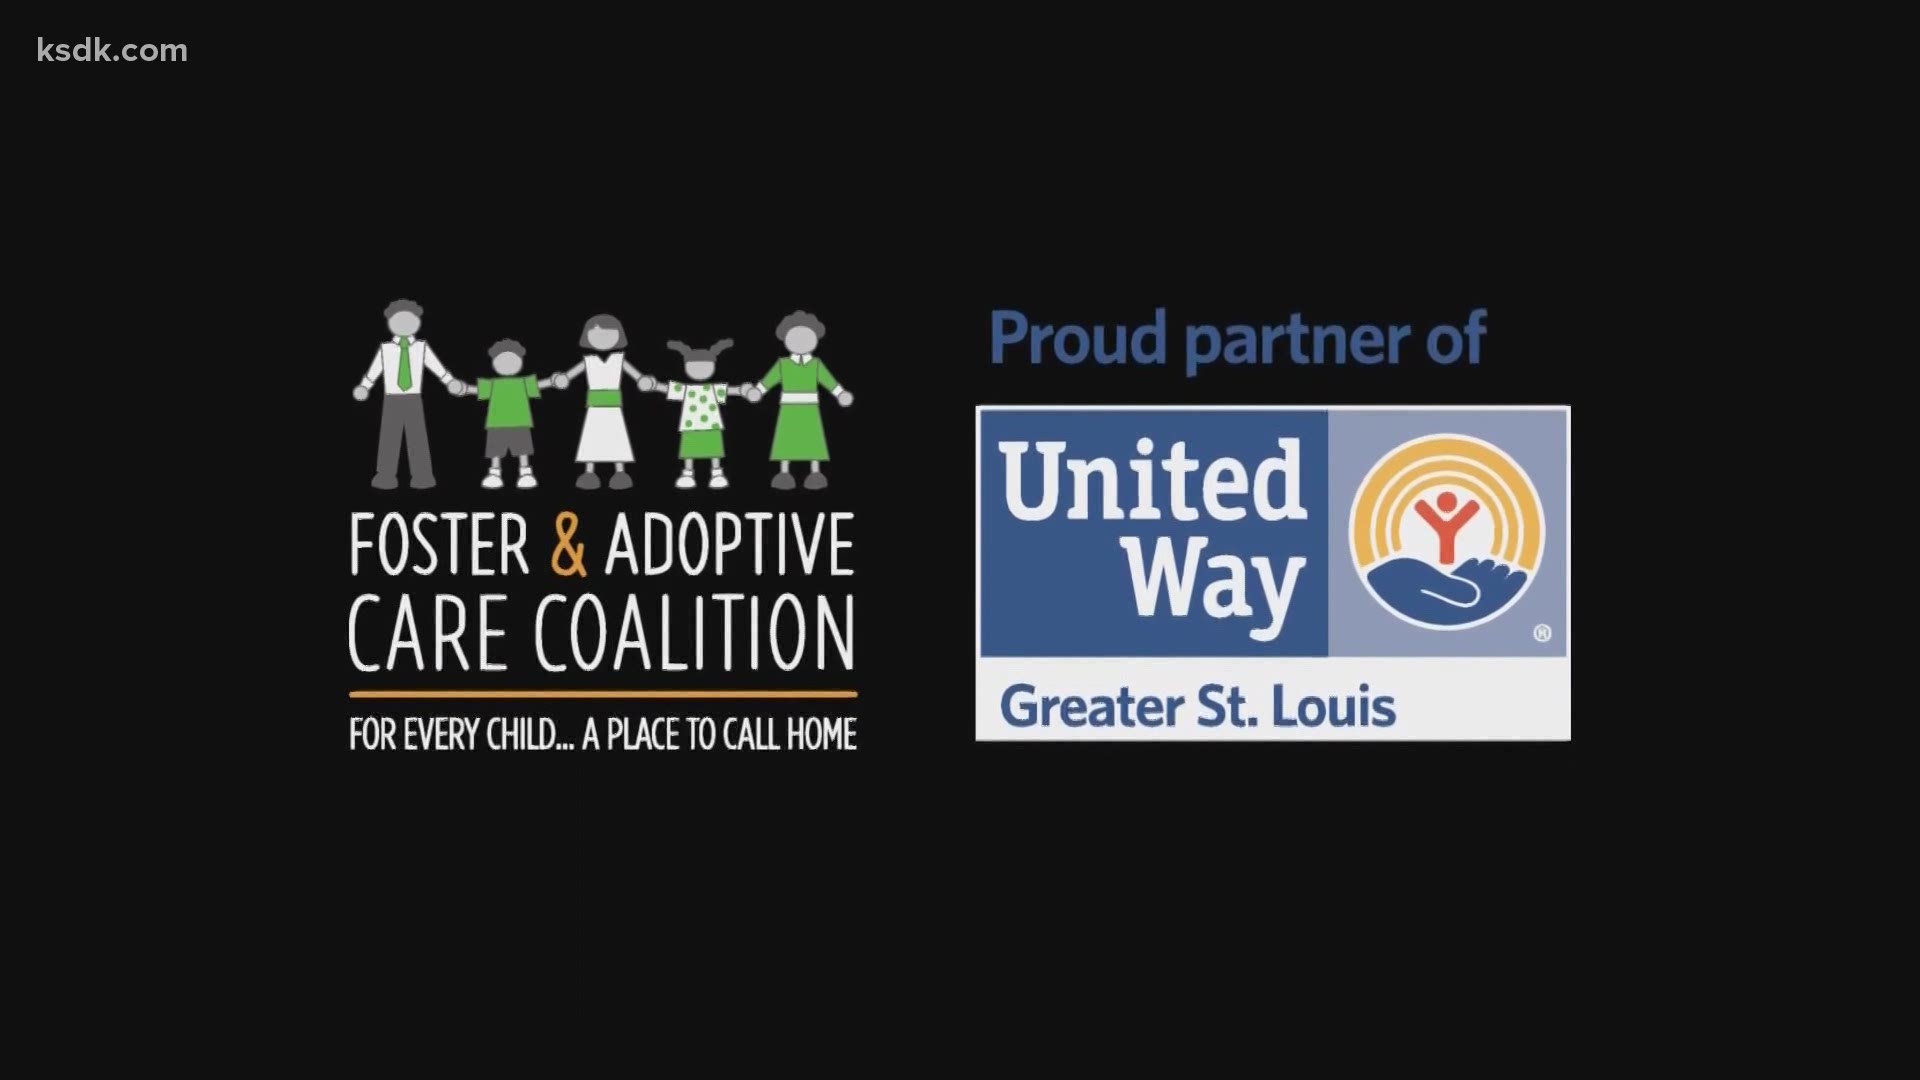 The Foster & Adoptive Care Coalition is celebrating long-term partnerships and continued care and support for kids in their community.